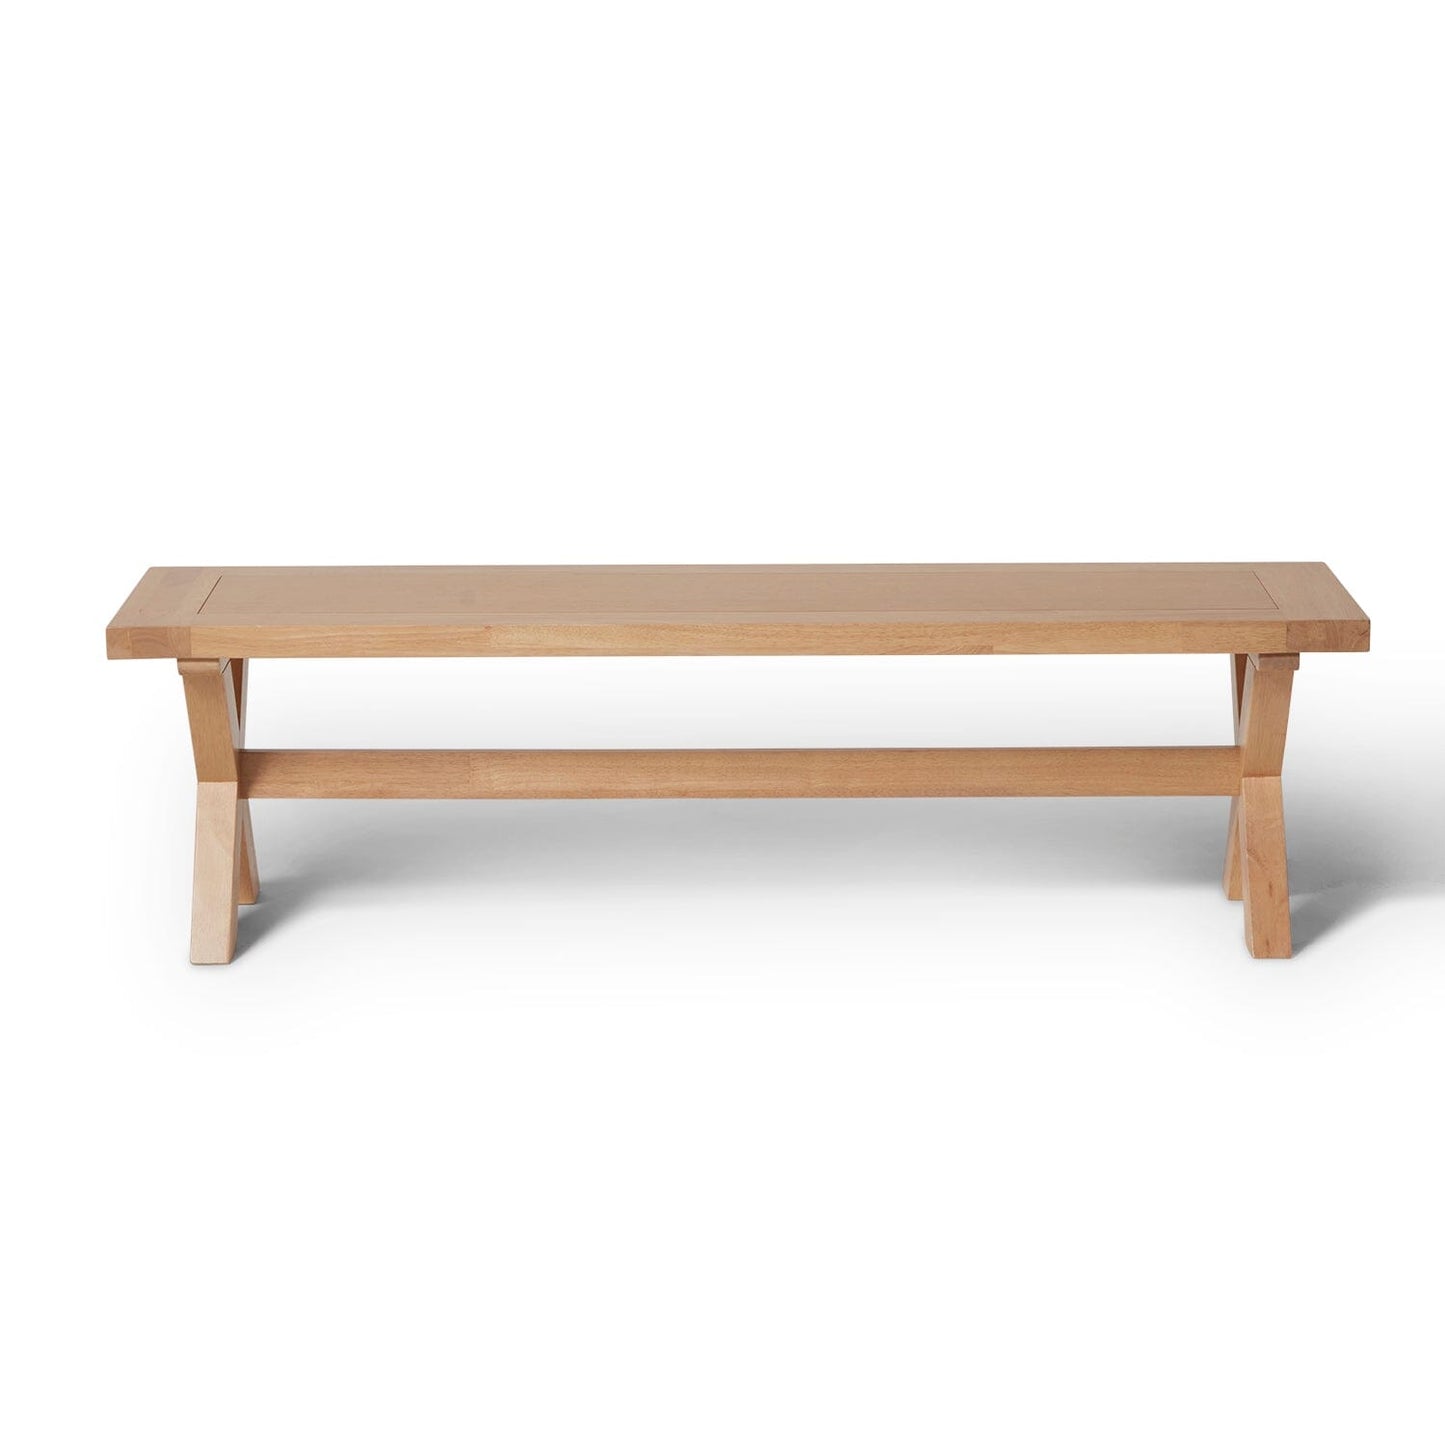 Charlotte Pale Oak Rustic Dining Room Bench - Laura James